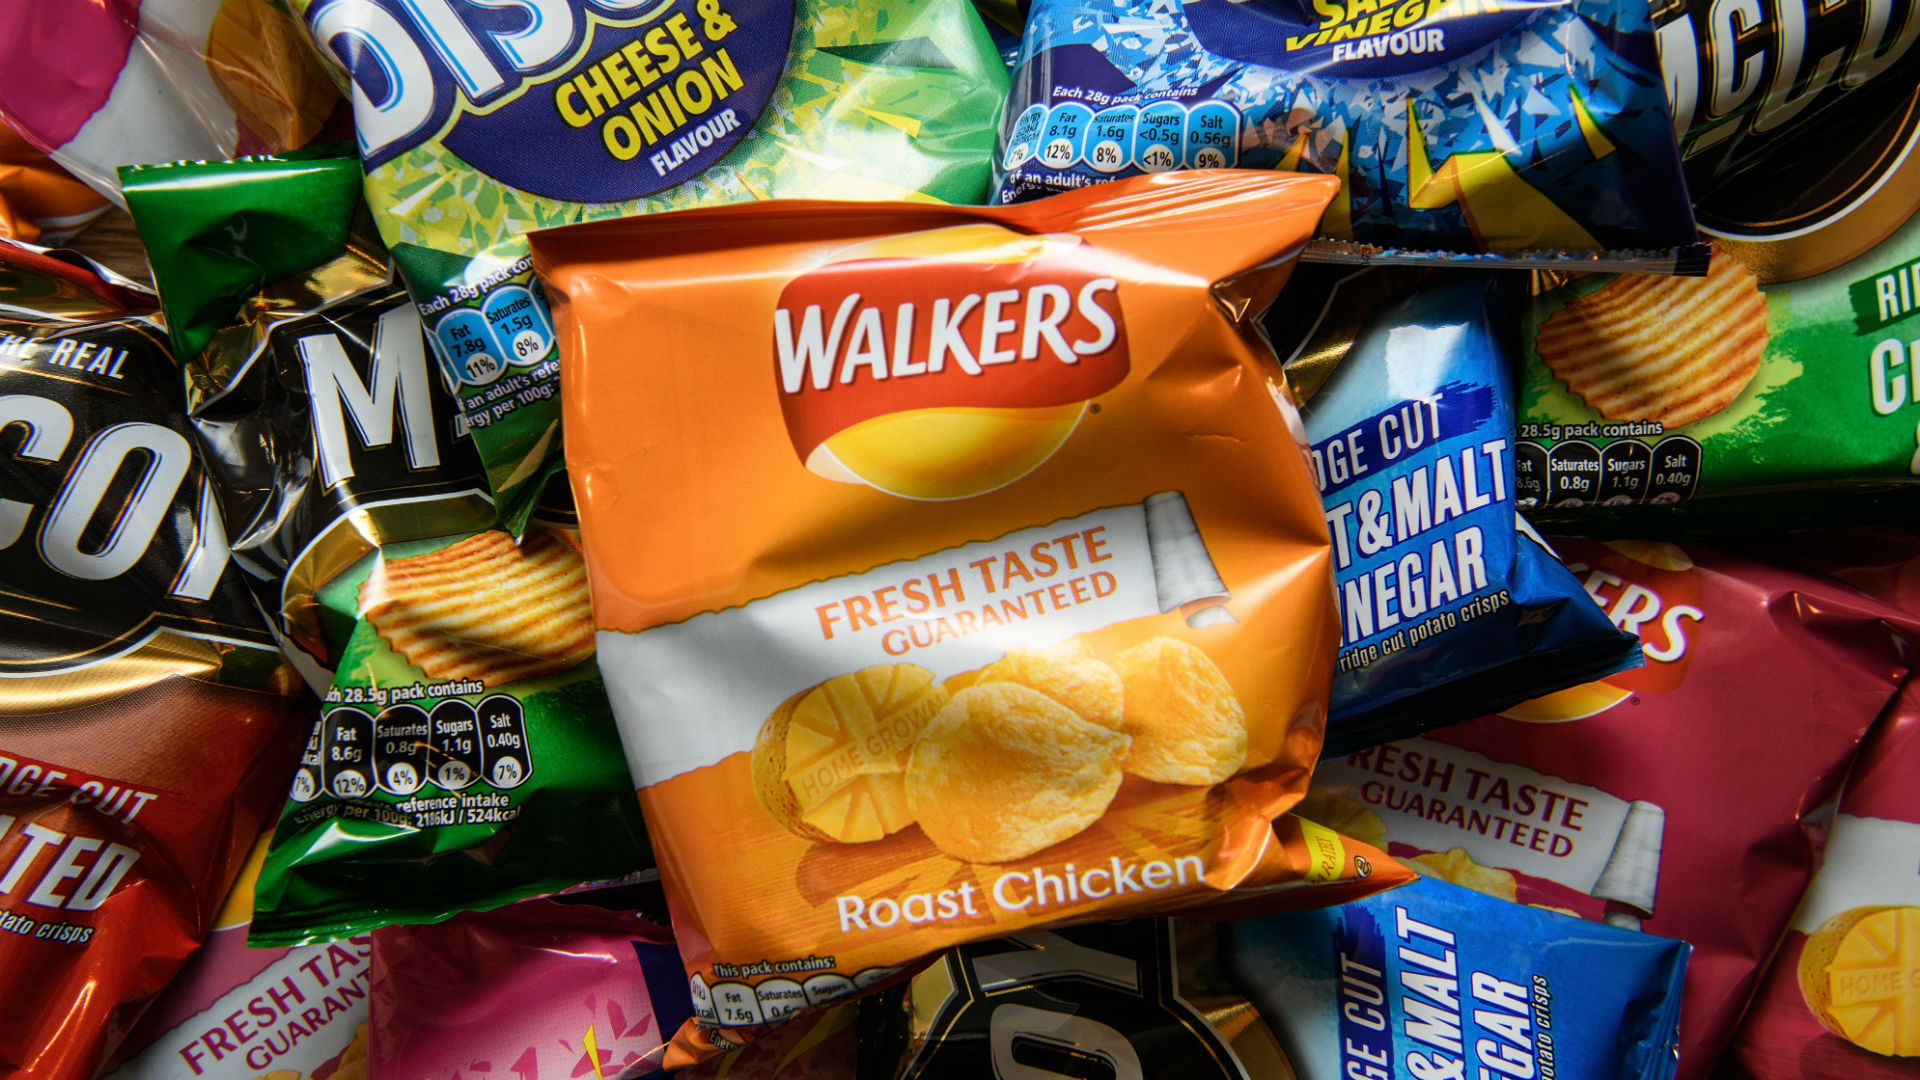 10 Iconic British Crisps and Crispy Savory Snacks You'll Want to Try